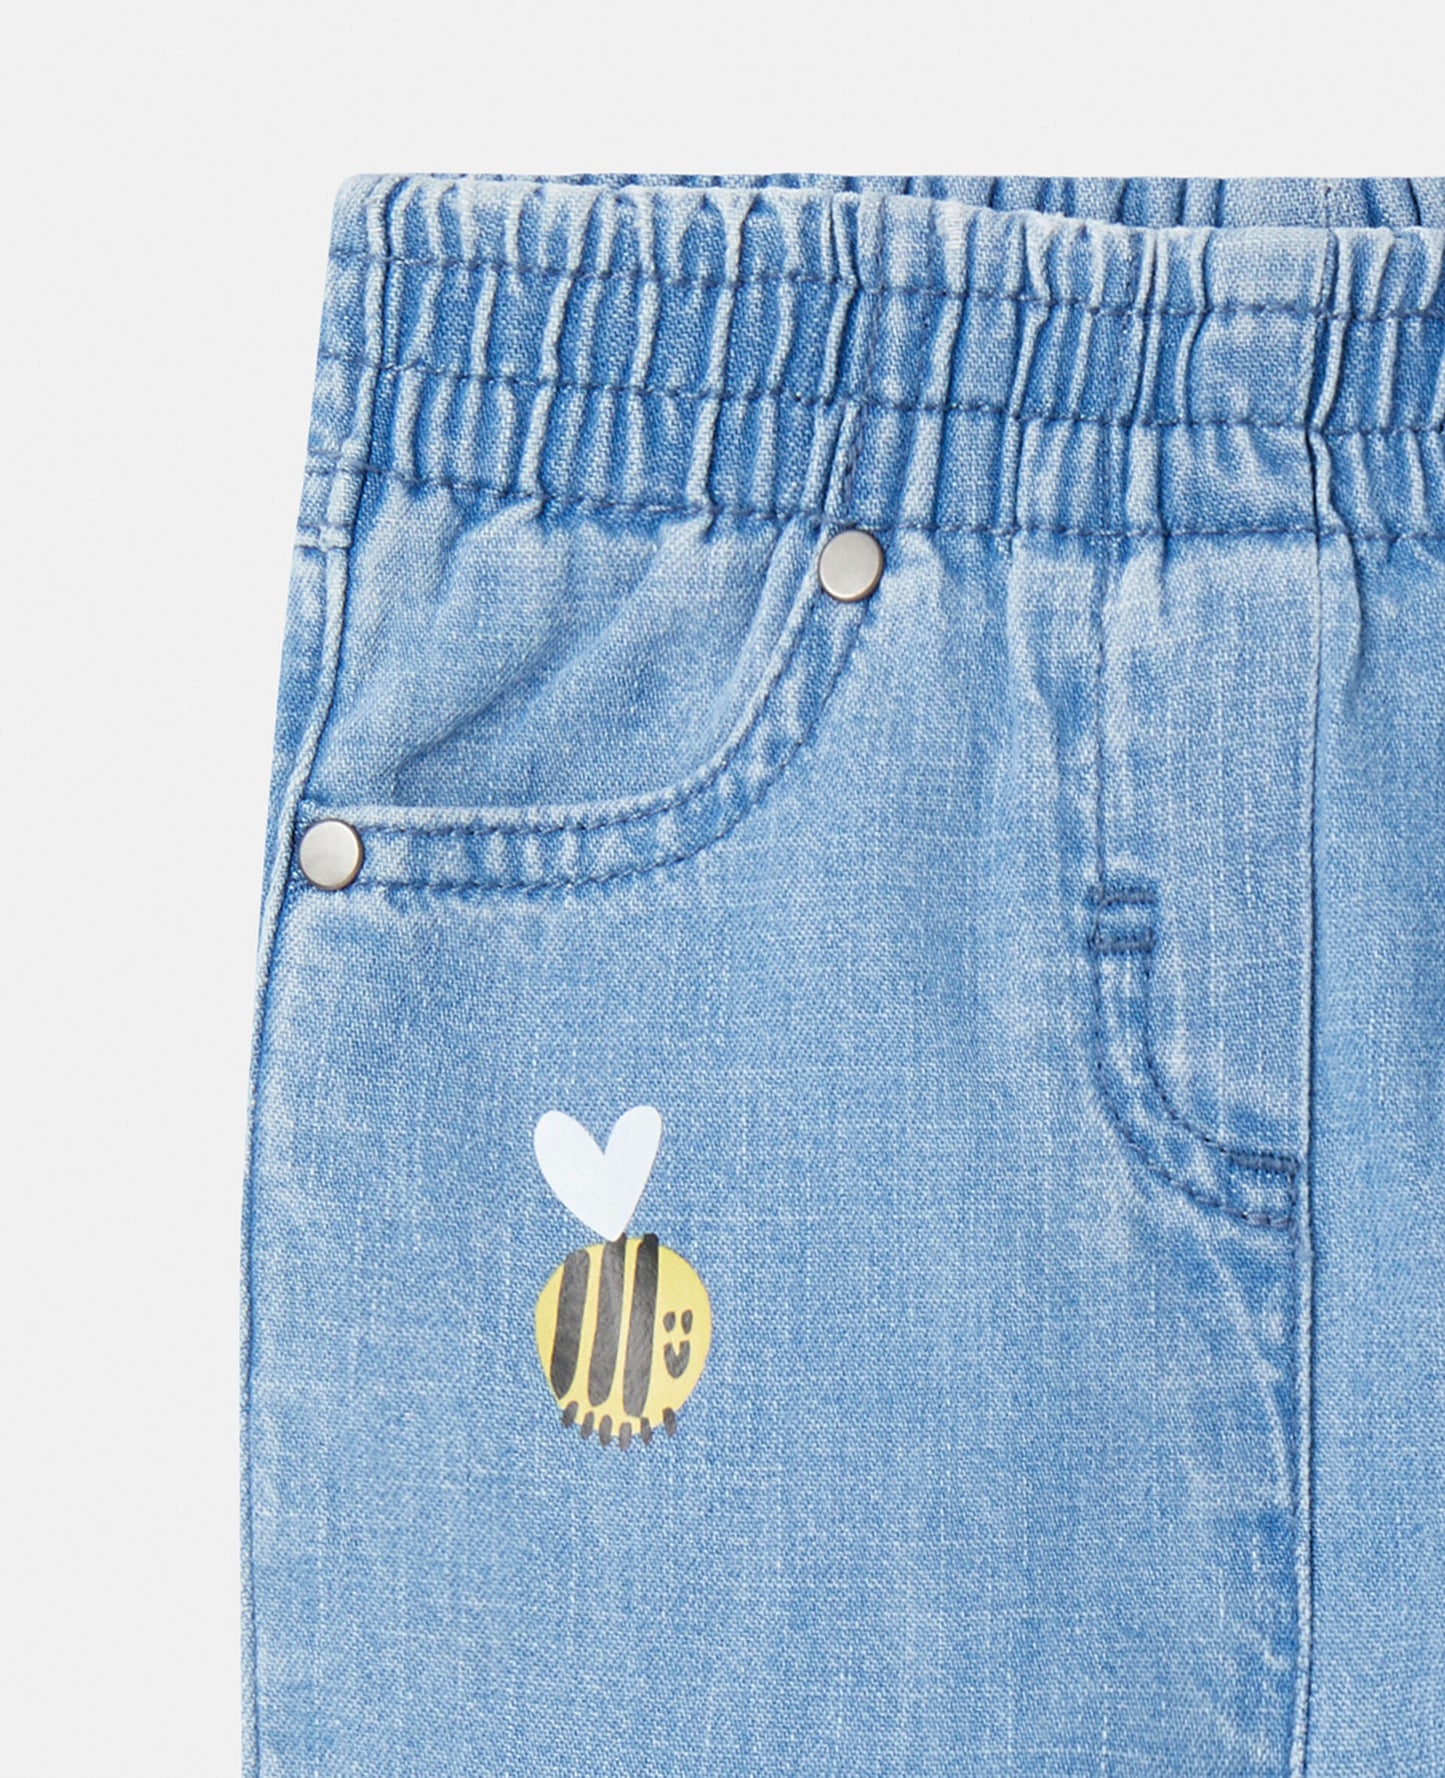 Bee Baby Jeans